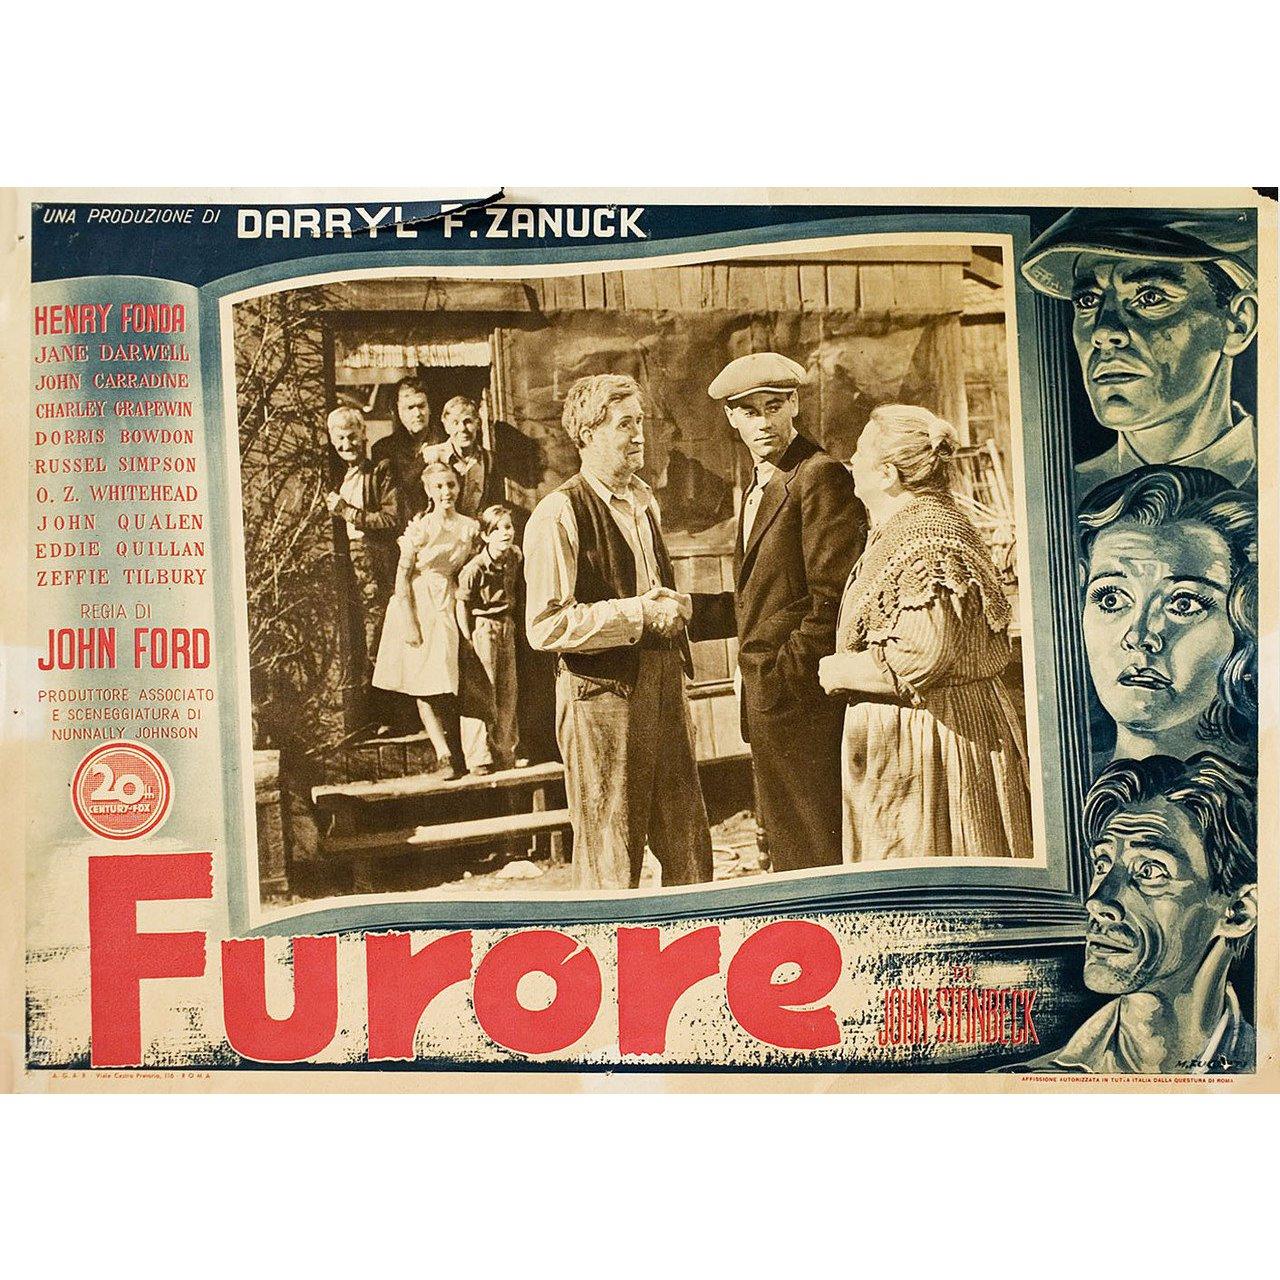 Original 1948 Italian fotobusta poster by M. Fuganti for the first Italian theatrical release of the 1940 film The Grapes of Wrath directed by John Ford with Henry Fonda / Jane Darwell / John Carradine / Charley Grapewin. Very good-fine condition,